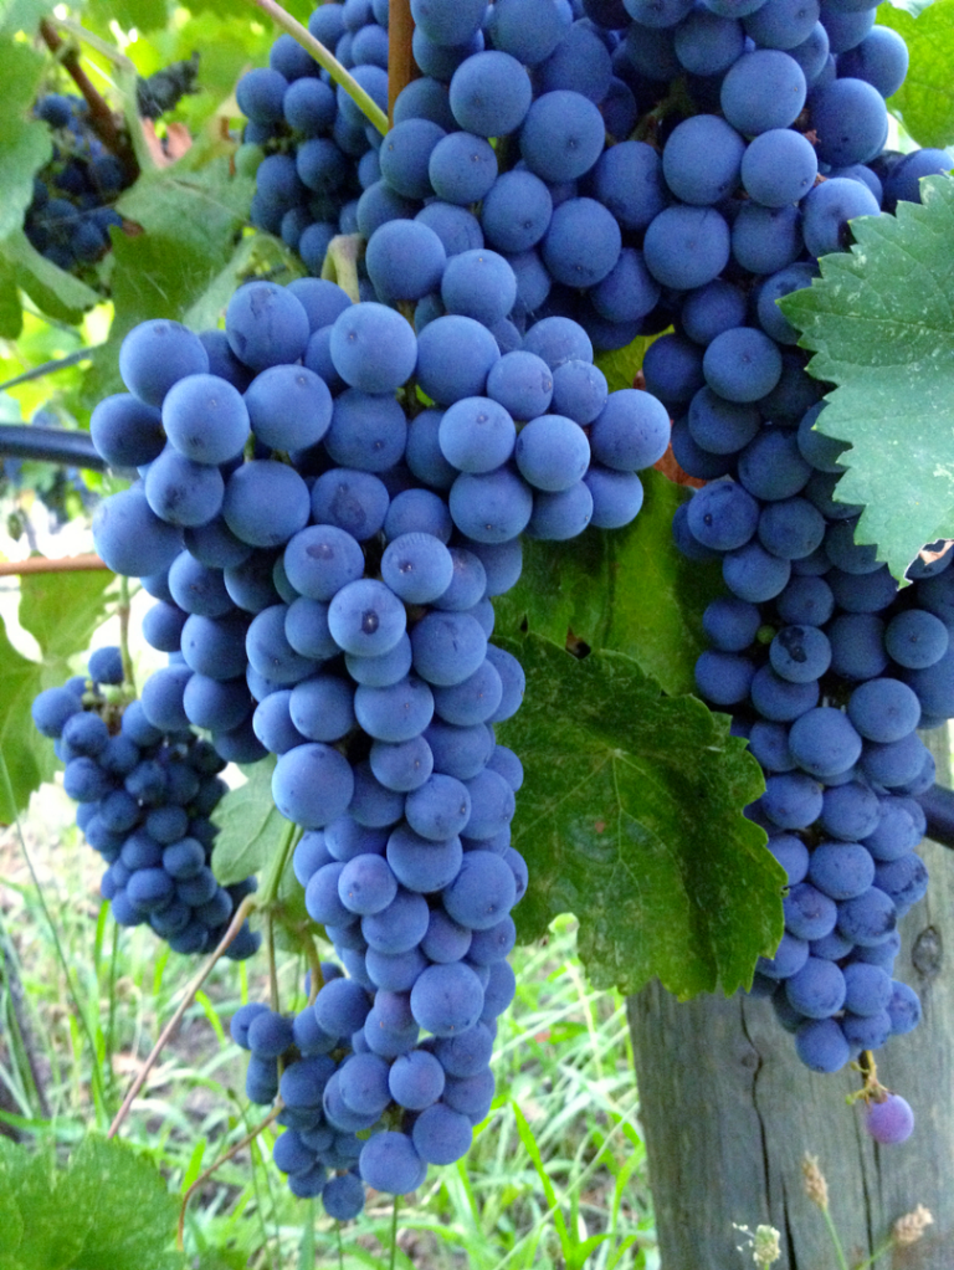 Cluster of ripe wine grapes